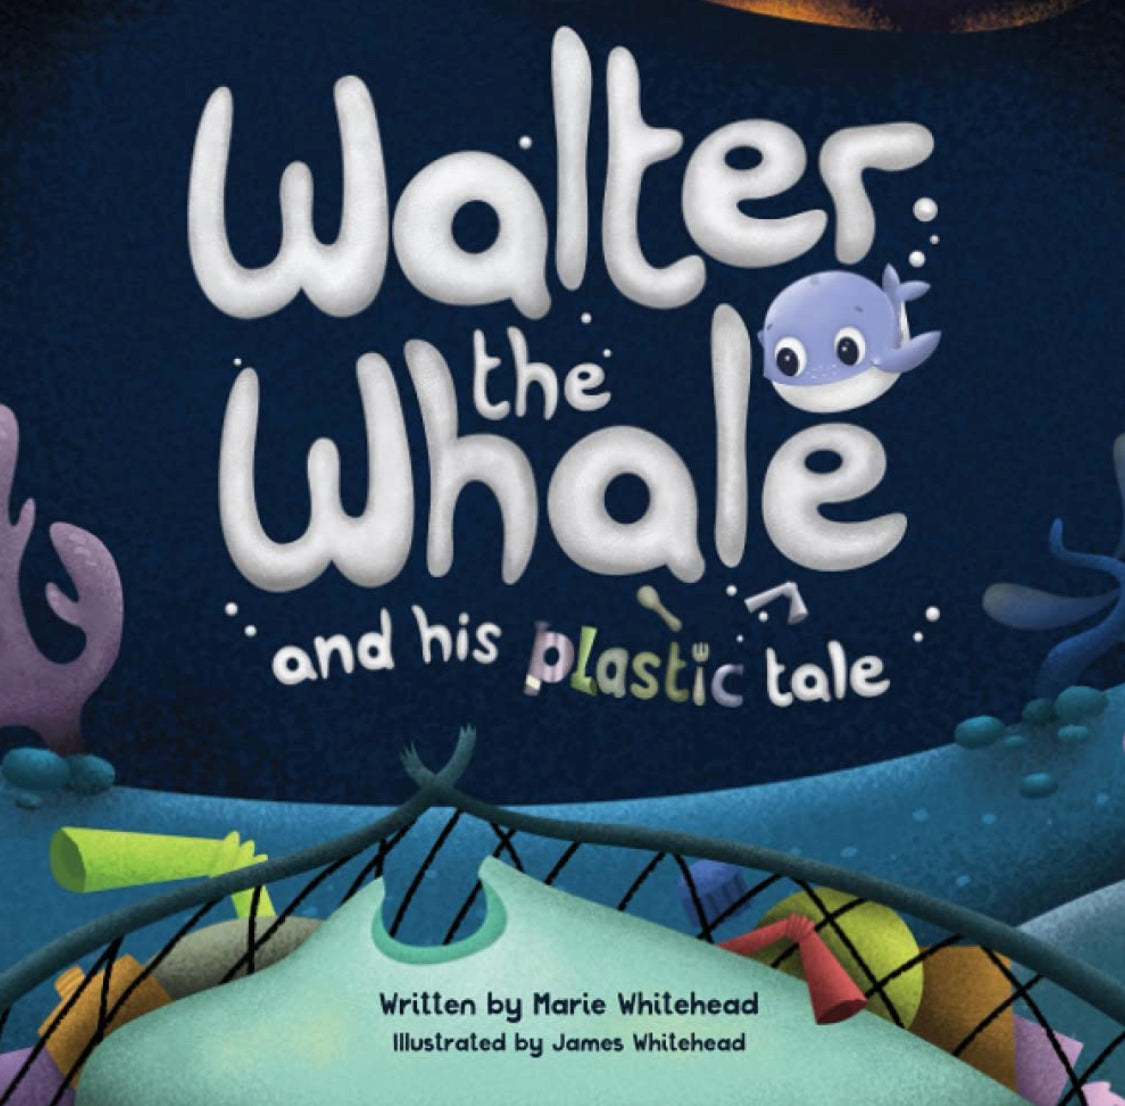 Walter the Whale and his plastic tale